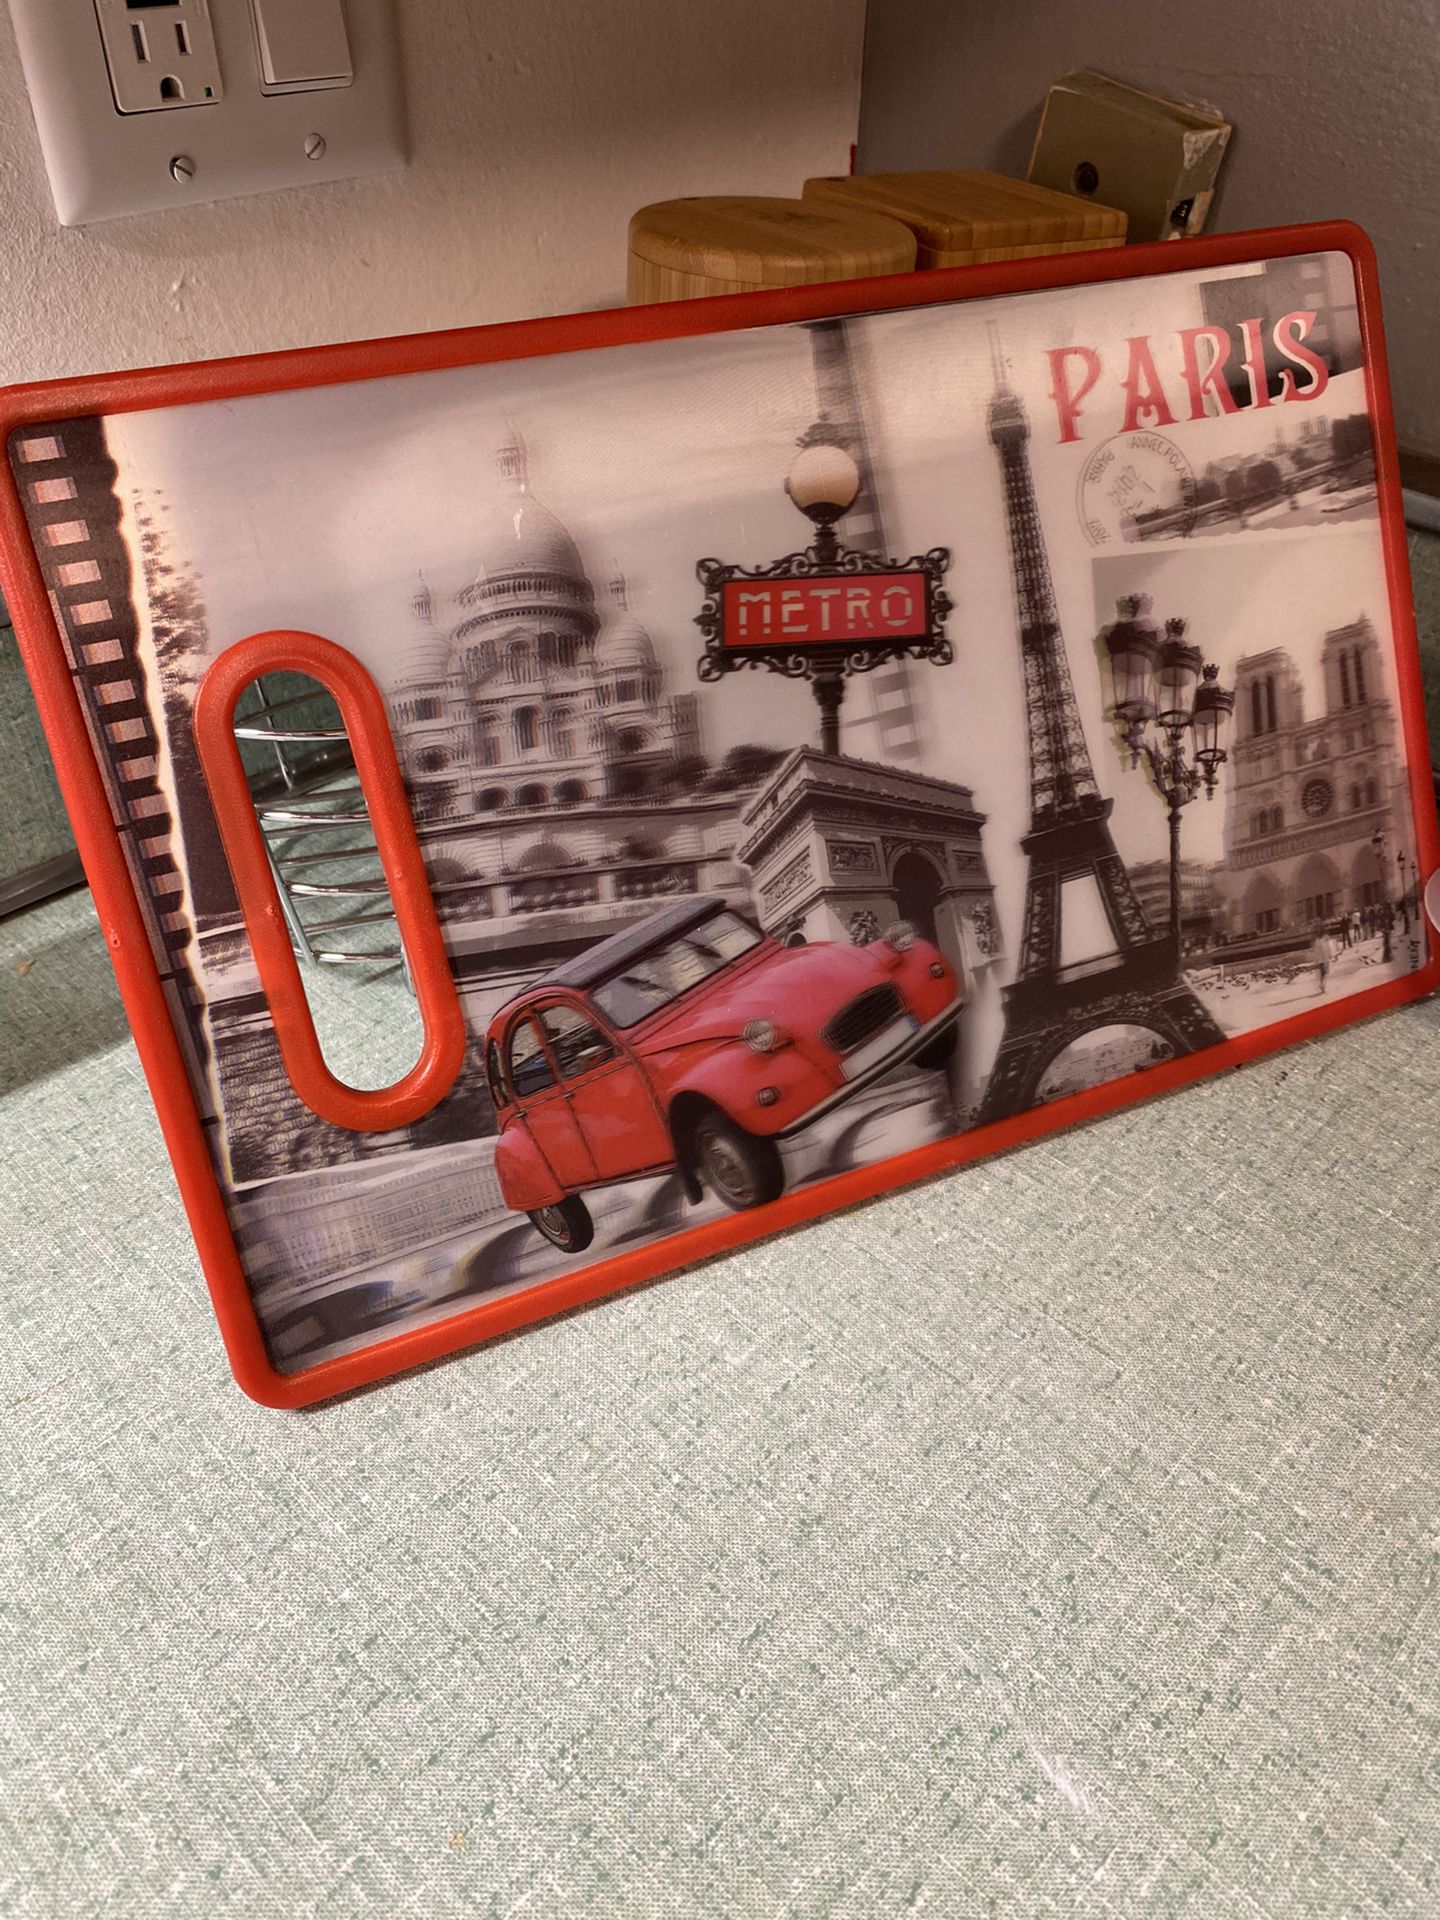 New never used Cuisinart 3D Paris themed cutting board